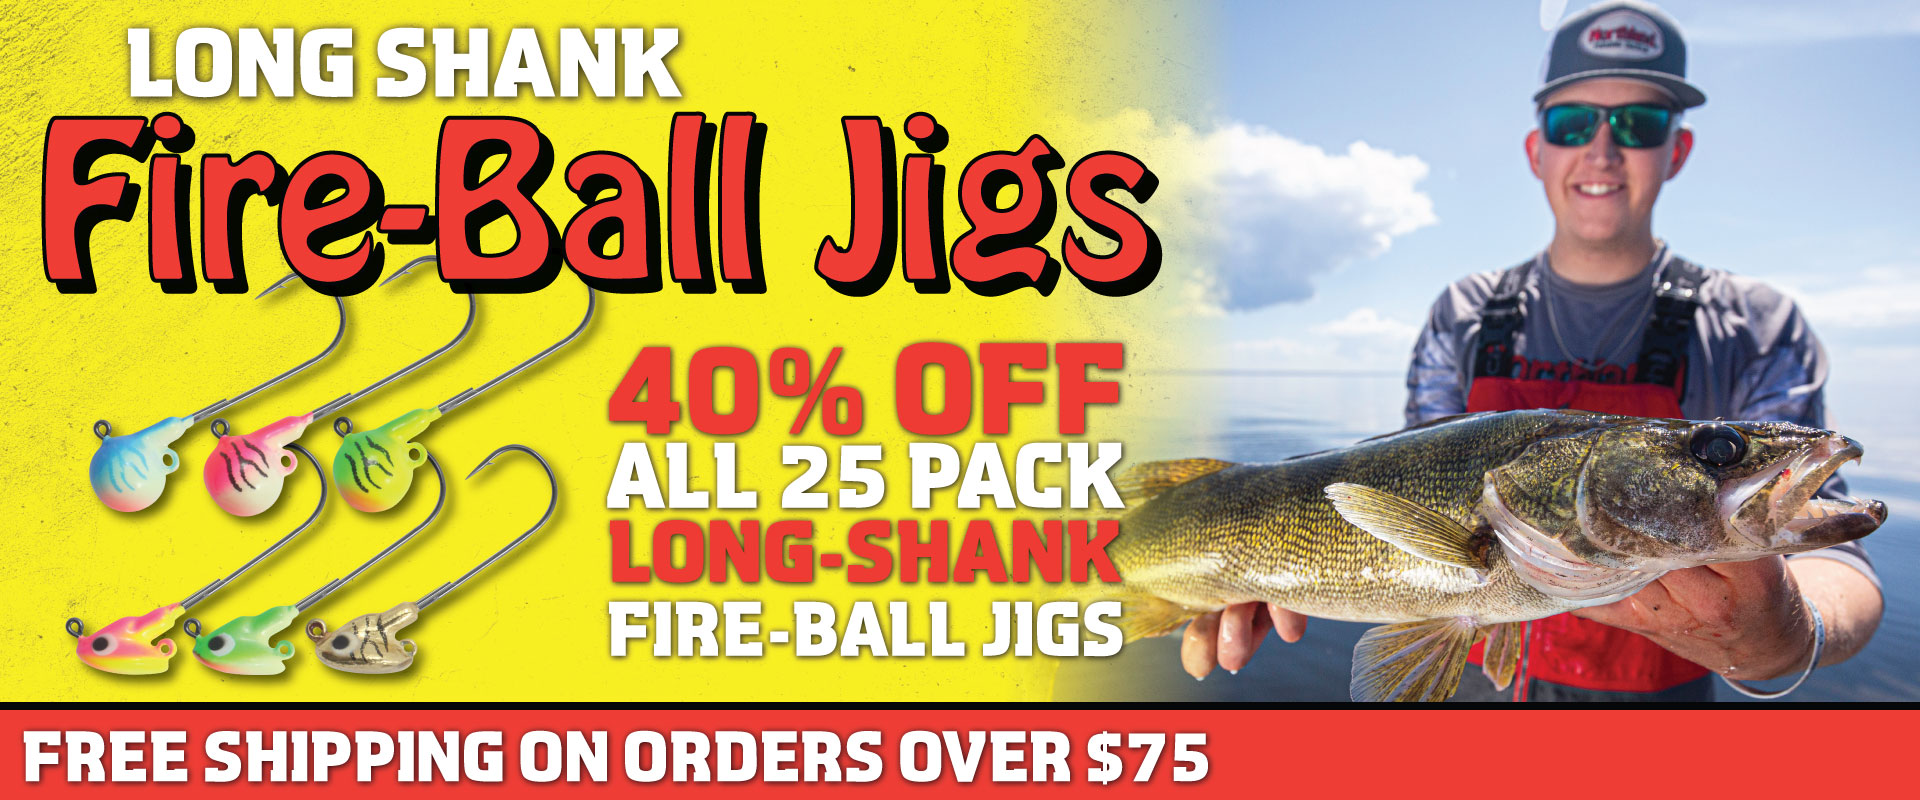 Northland Fishing Tackle Long-Shank Fire-Ball Jig on sale 40%